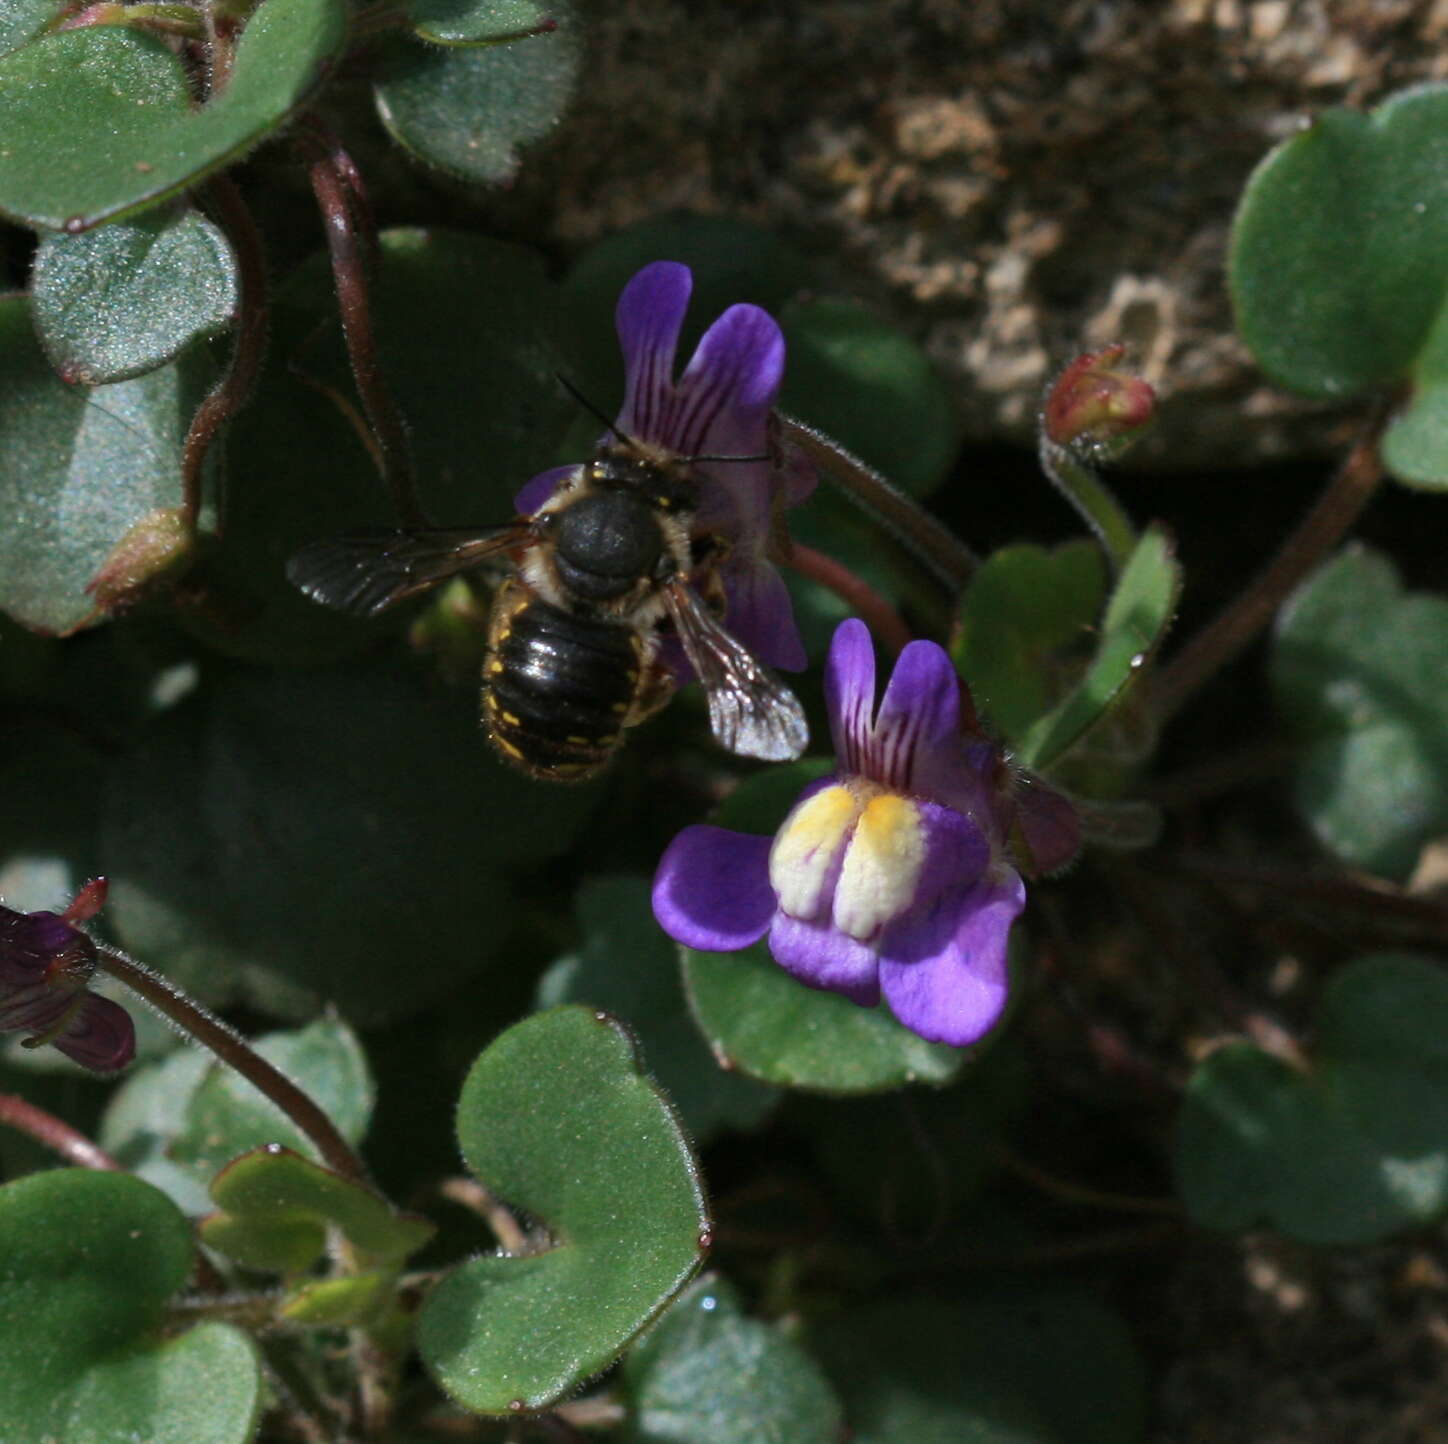 Image of wool-carder bee